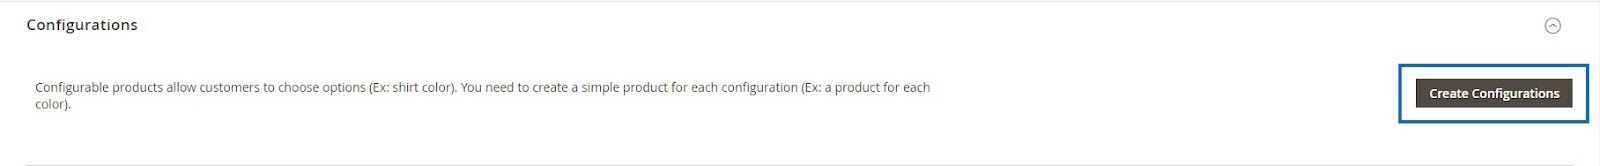 create configurations for the configurable product in Magento 2.